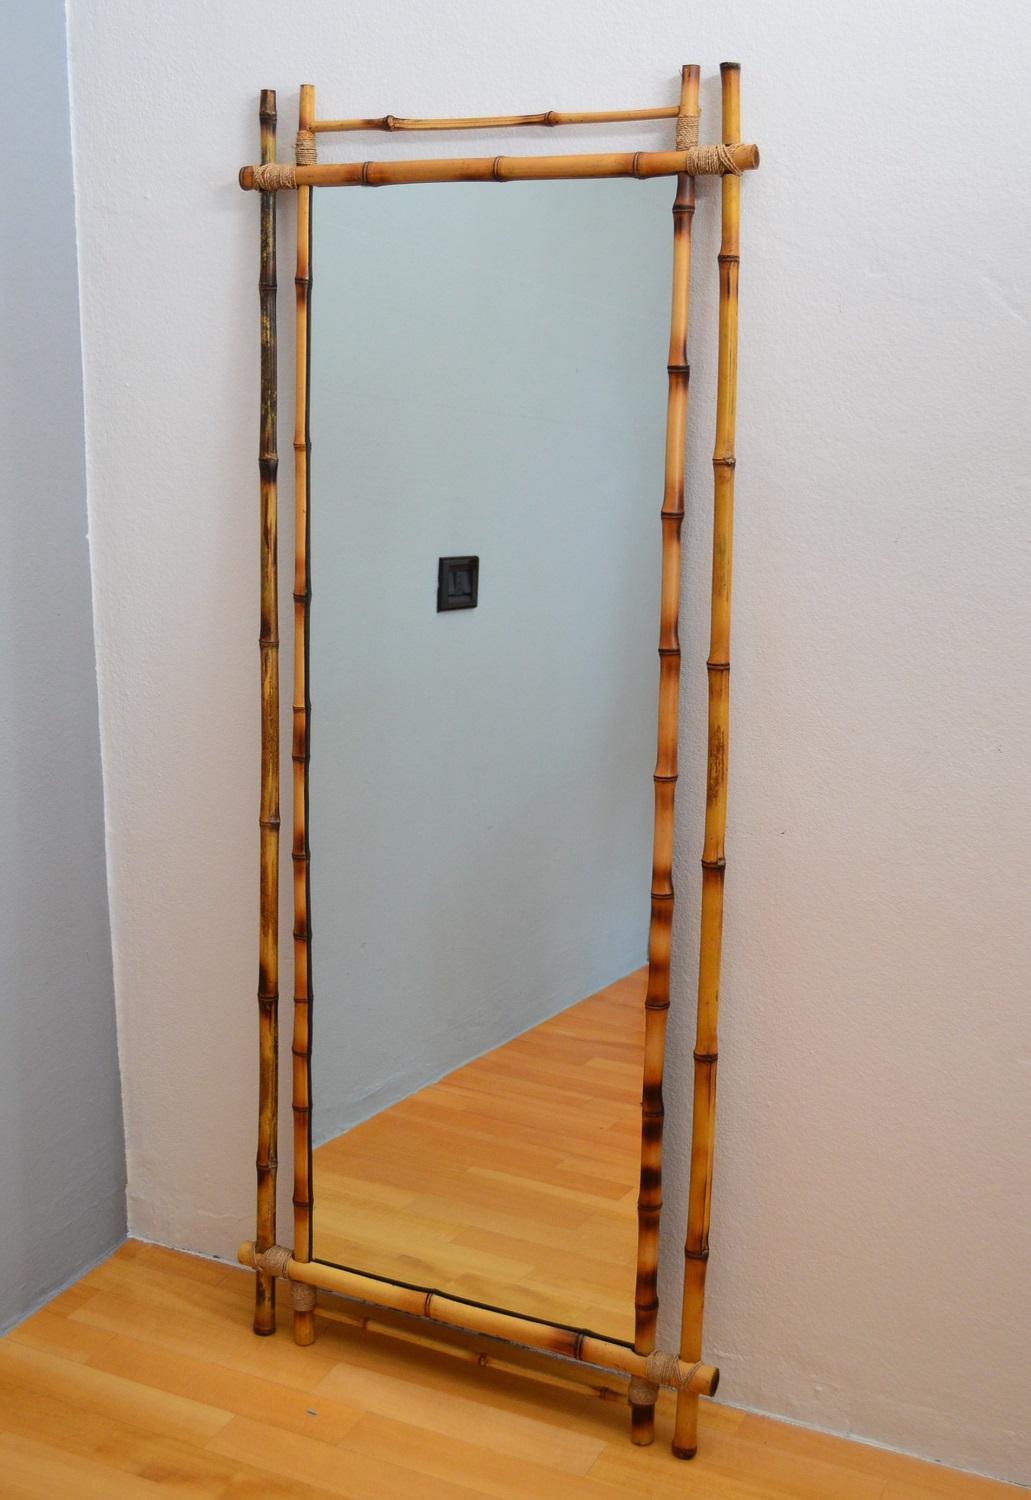 Beautiful large wall mirror made of real narrow bamboo, tied with natural ribbon / cord.
Made in Italy in the 1960s.

The mirror is a beautiful vintage piece in very good condition and has quite large dimensions, making it ideal for an entrance